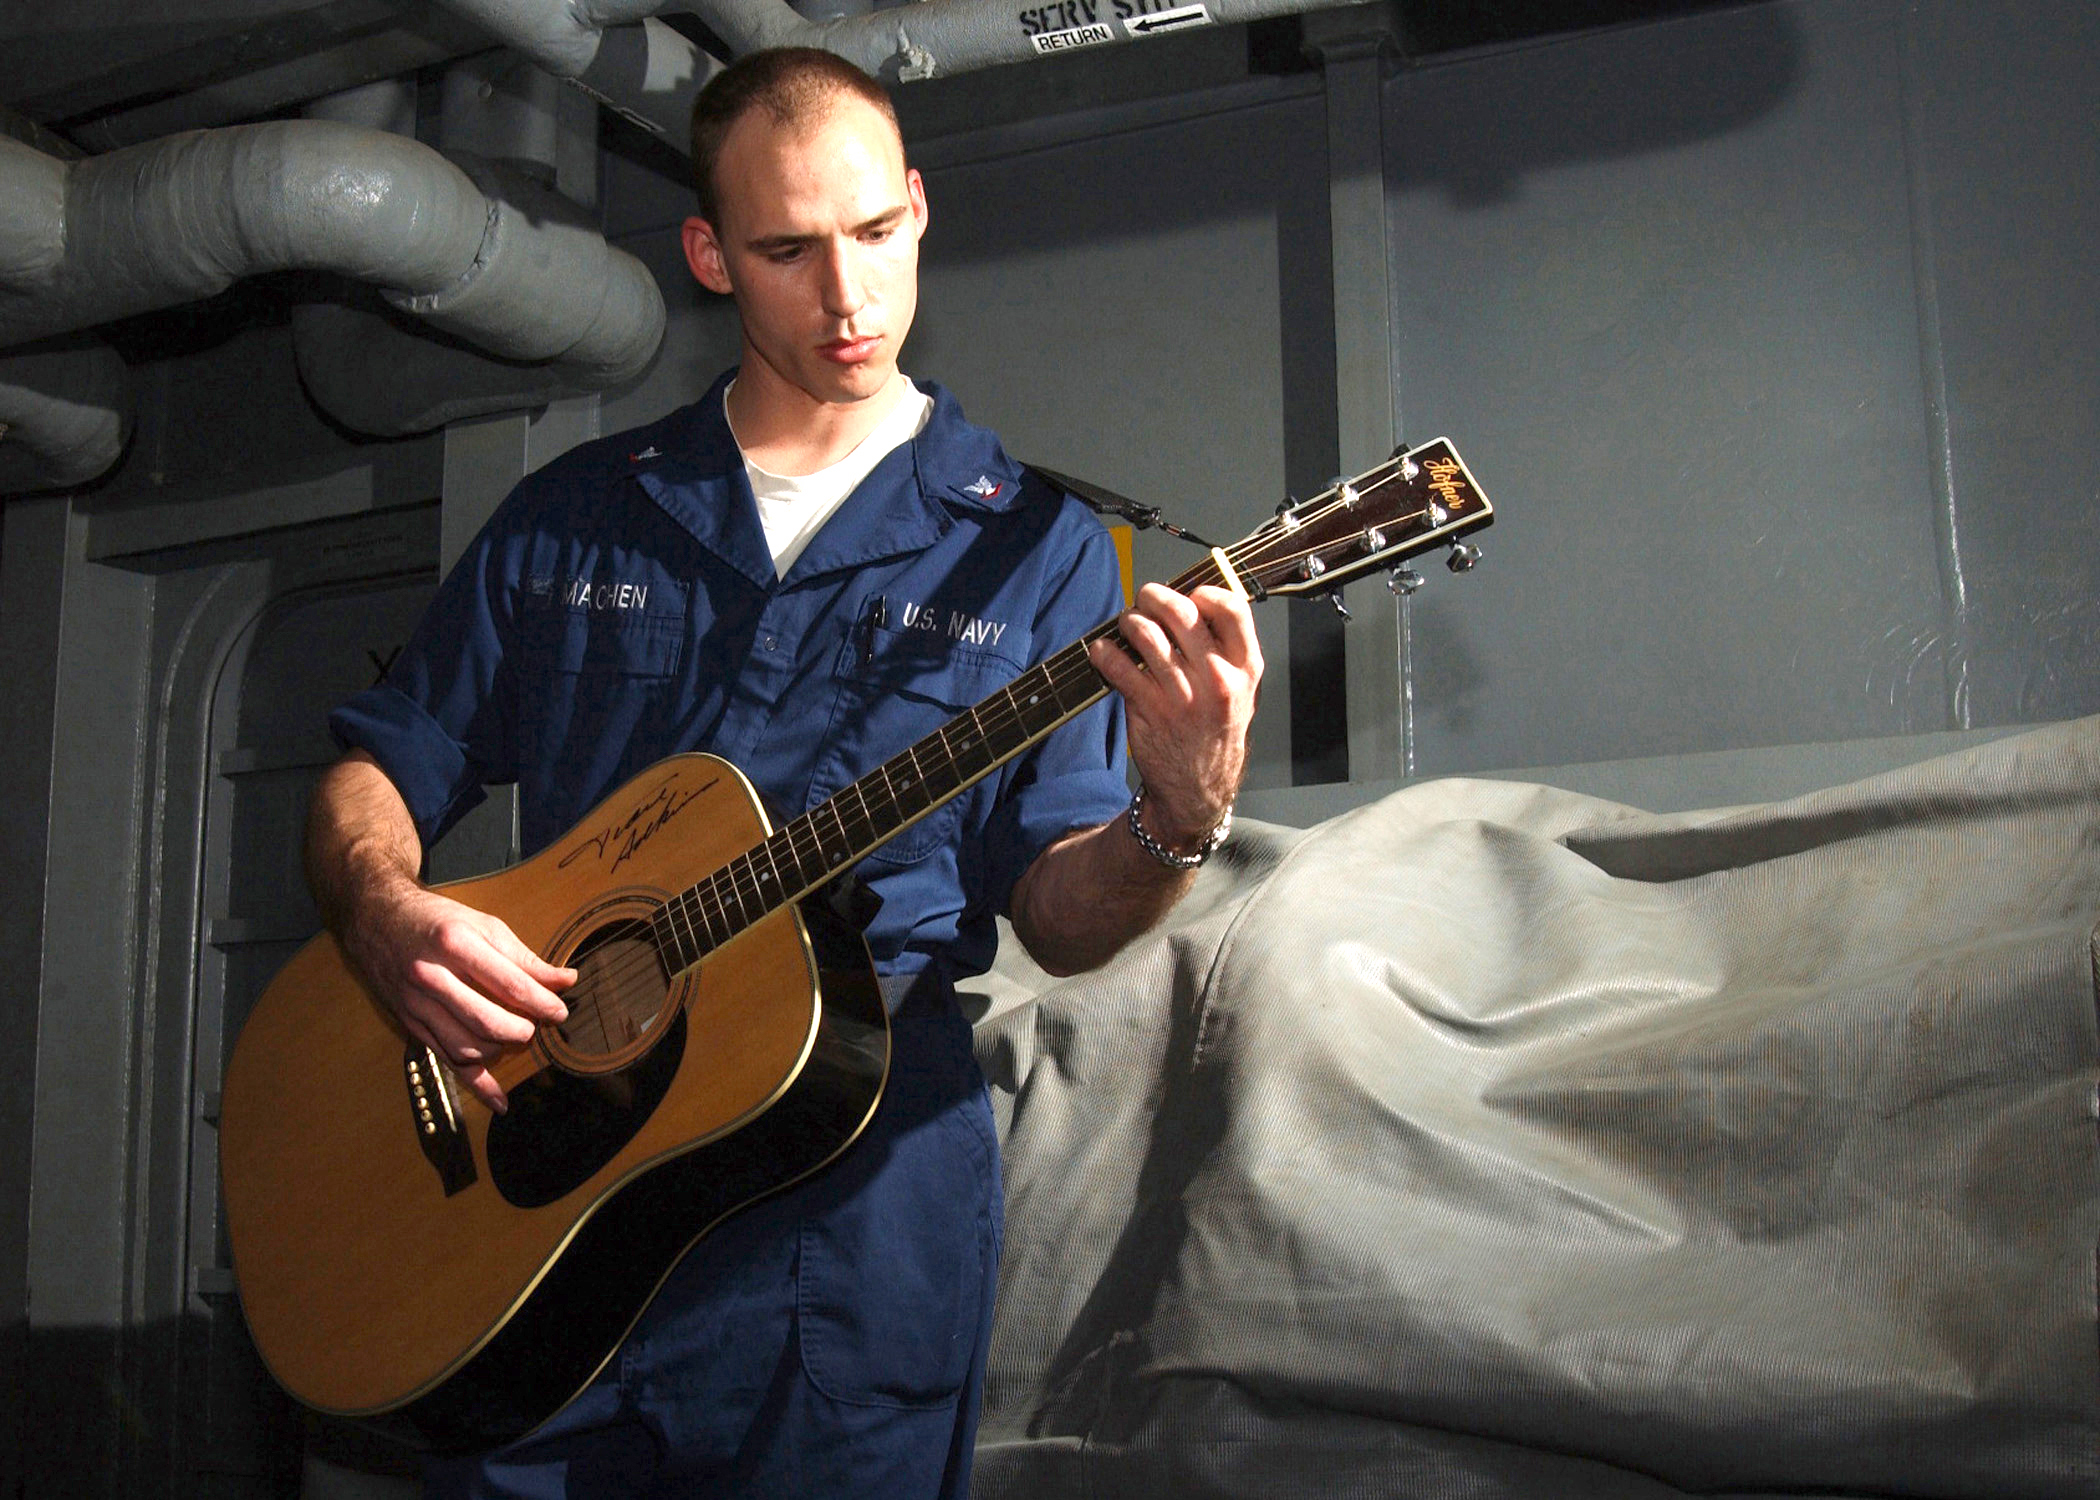 US Navy 021201-N-6817C-001 Sailor enjoys playing his guitar during some leisure time aboard the aircraft carrier USS Abraham Lincoln (CVN 72)